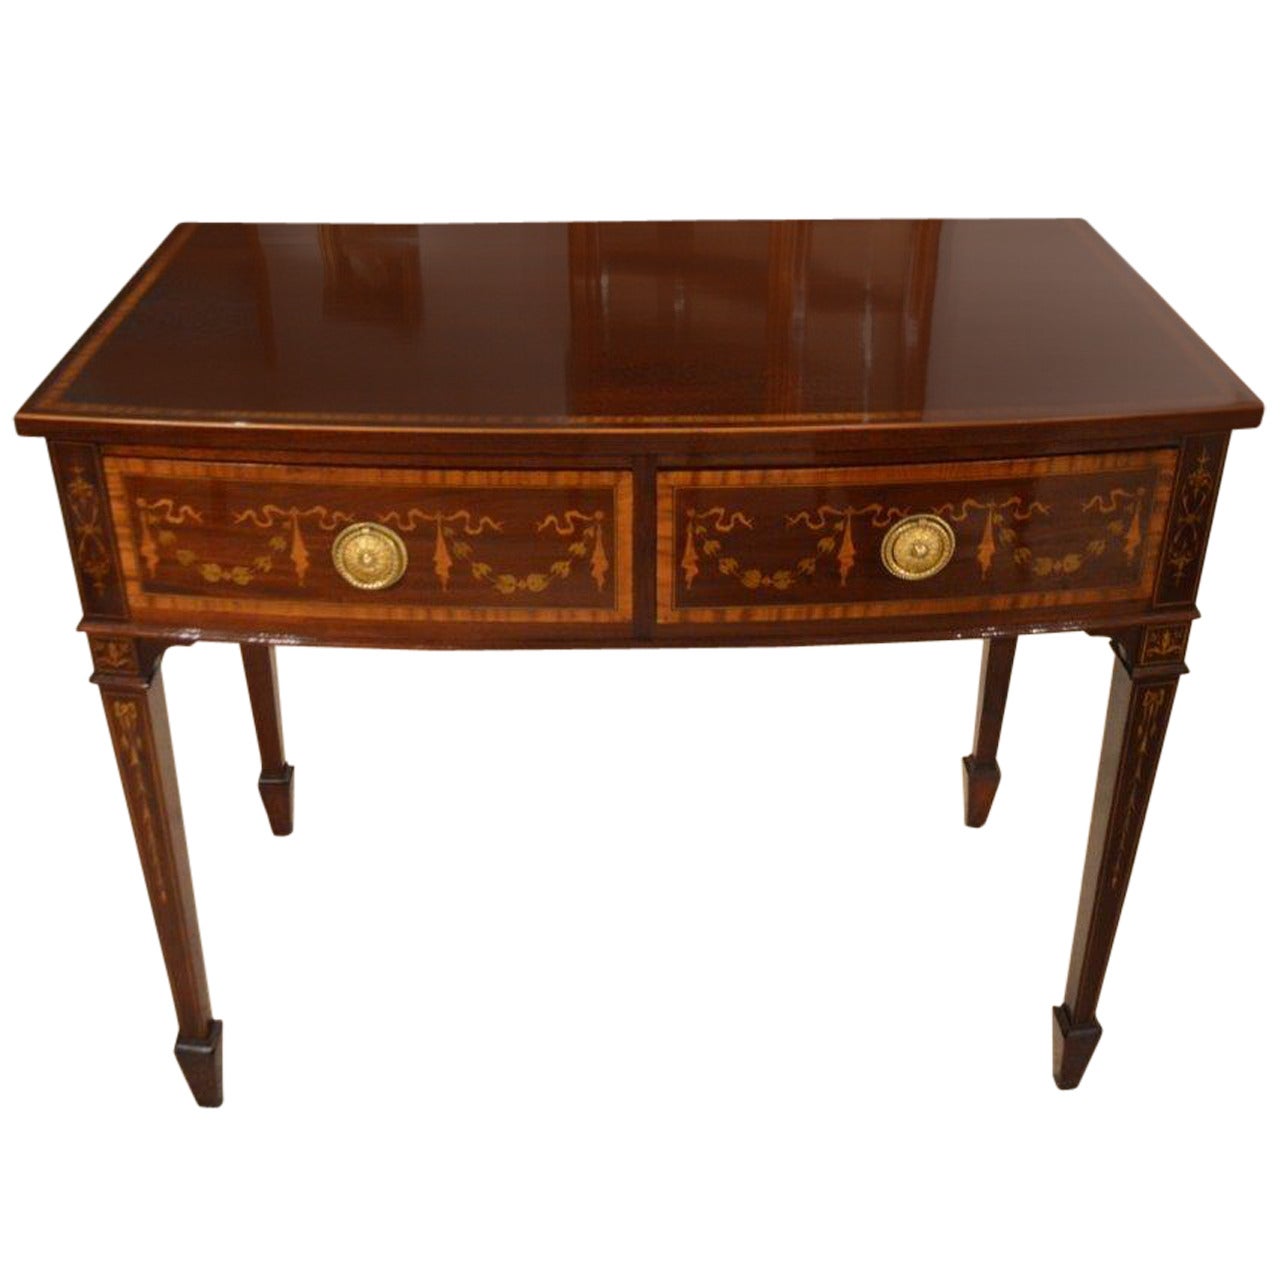 Stunning Quality Mahogany Inlaid Edwardian Period Two-Drawer Side Table